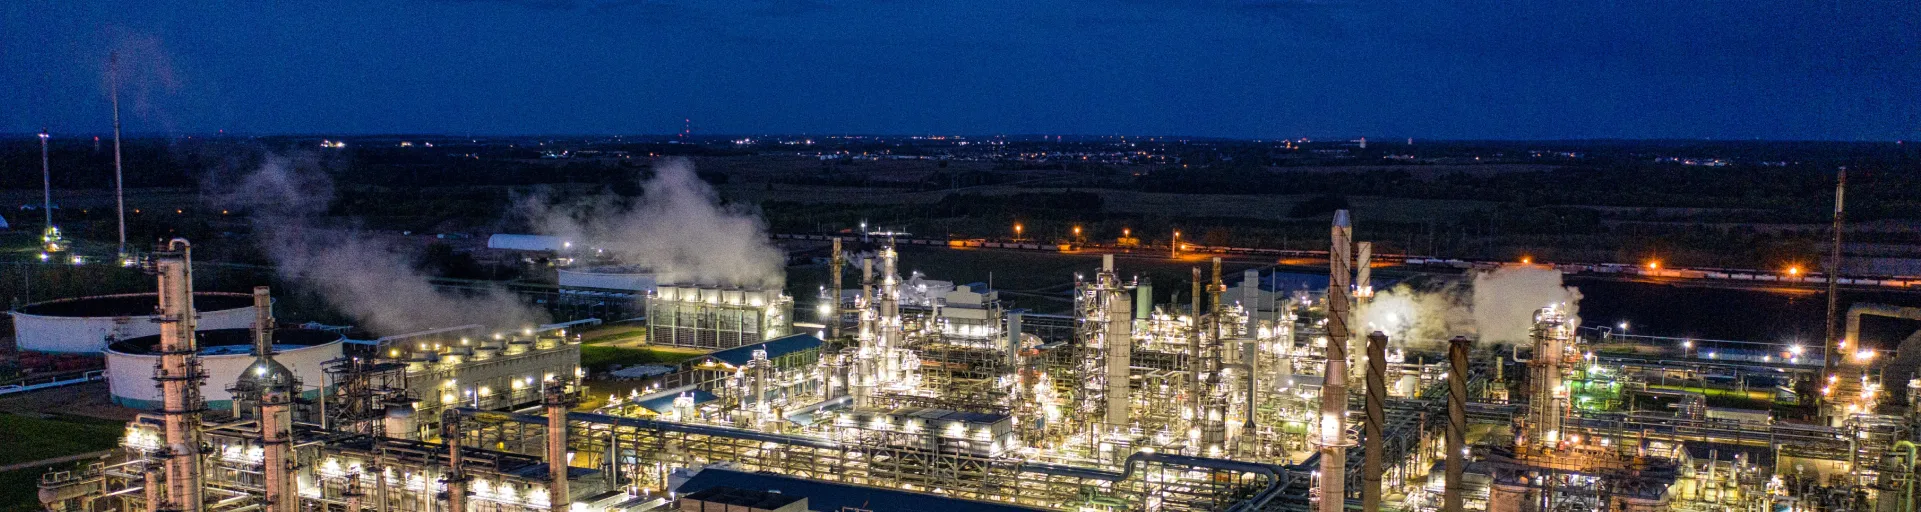 Aerial evening shot of a massive oil plant